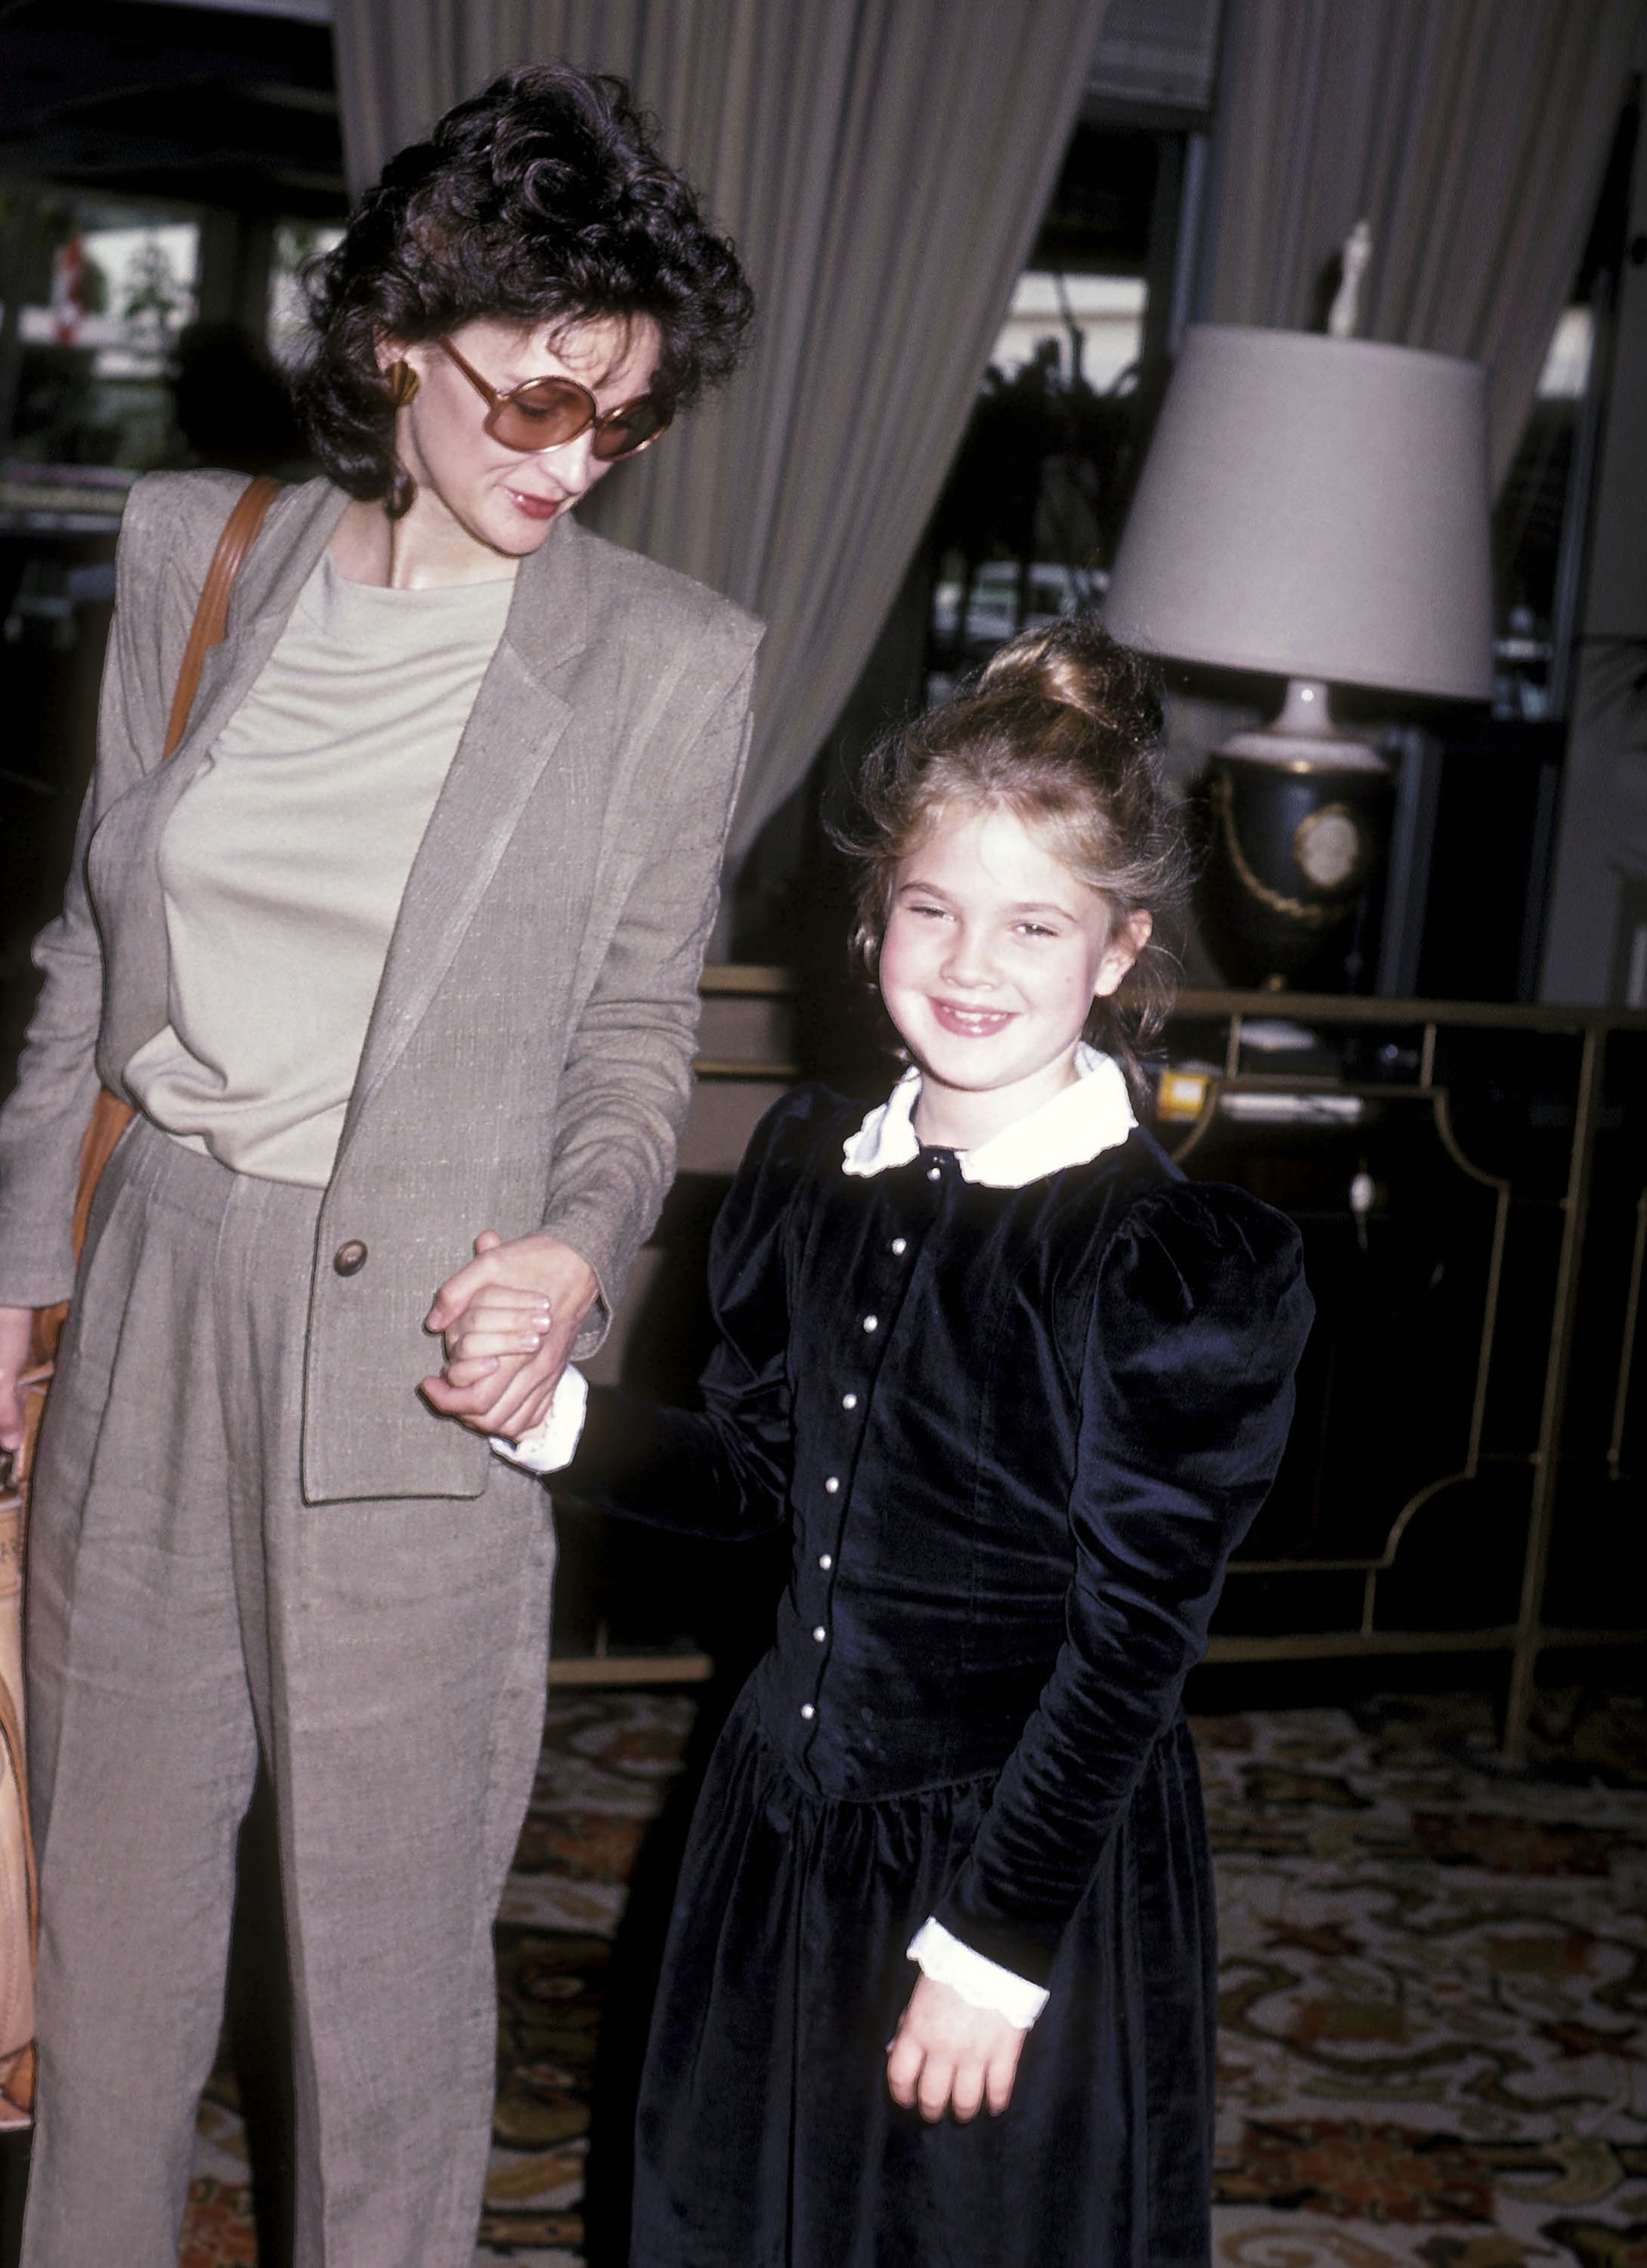 Drew Barrymore and mother Jaid Barrymore attend the Young Musicians Foundation's Second Annual Celebrity Mother/Daughter Fashion Show on March 10, 1983 | Photo: GettyImages